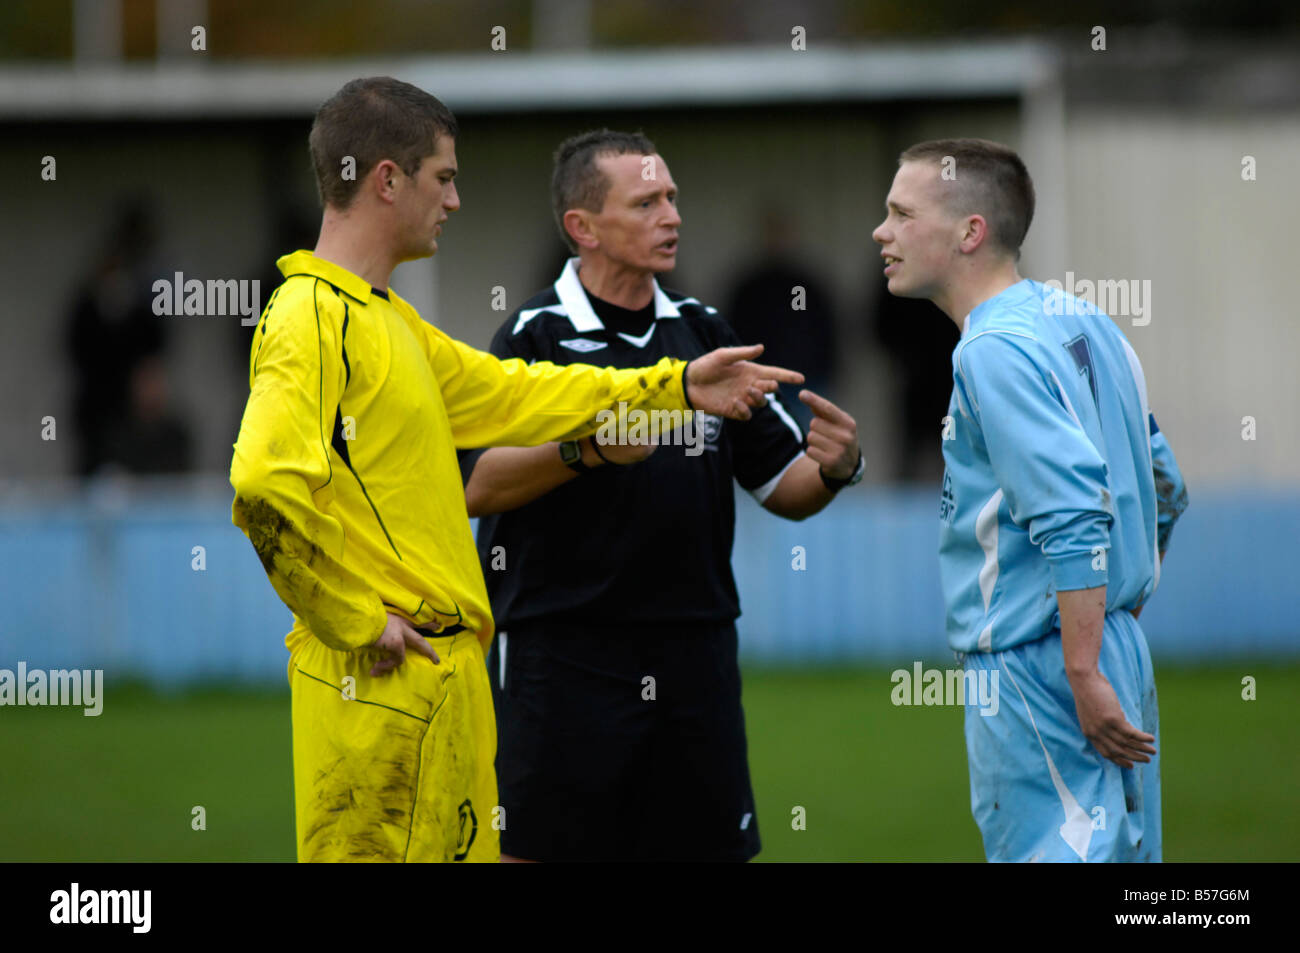 referee tries to settle dispute between two opponents Stock Photo